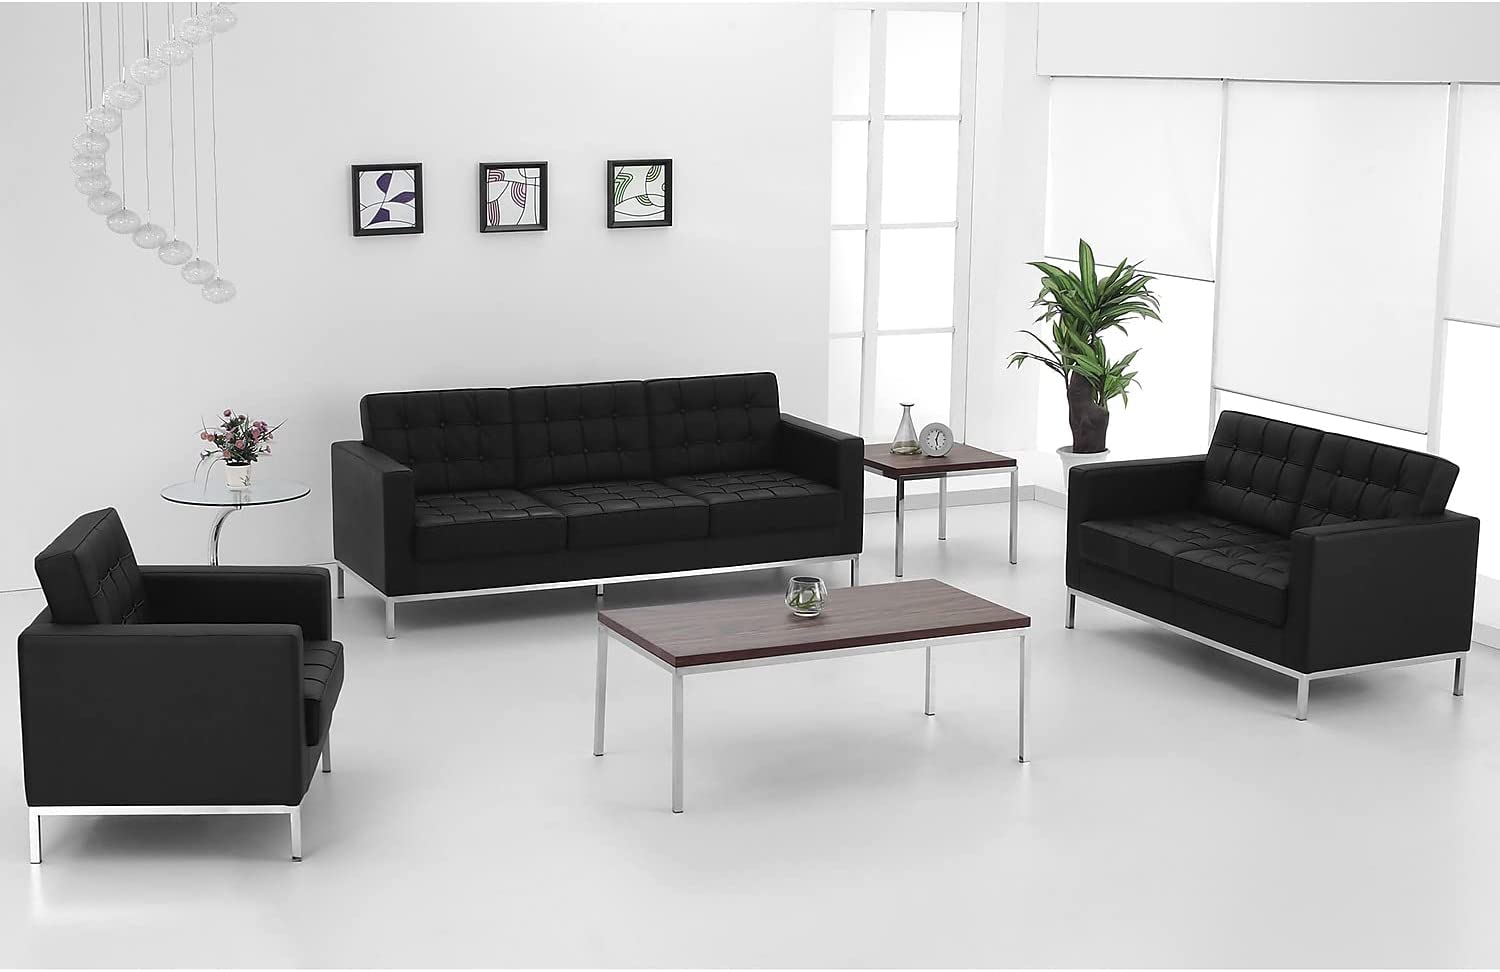 Flash Furniture HERCULES Lacey Series Contemporary Black LeatherSoft Loveseat with Stainless Steel Frame